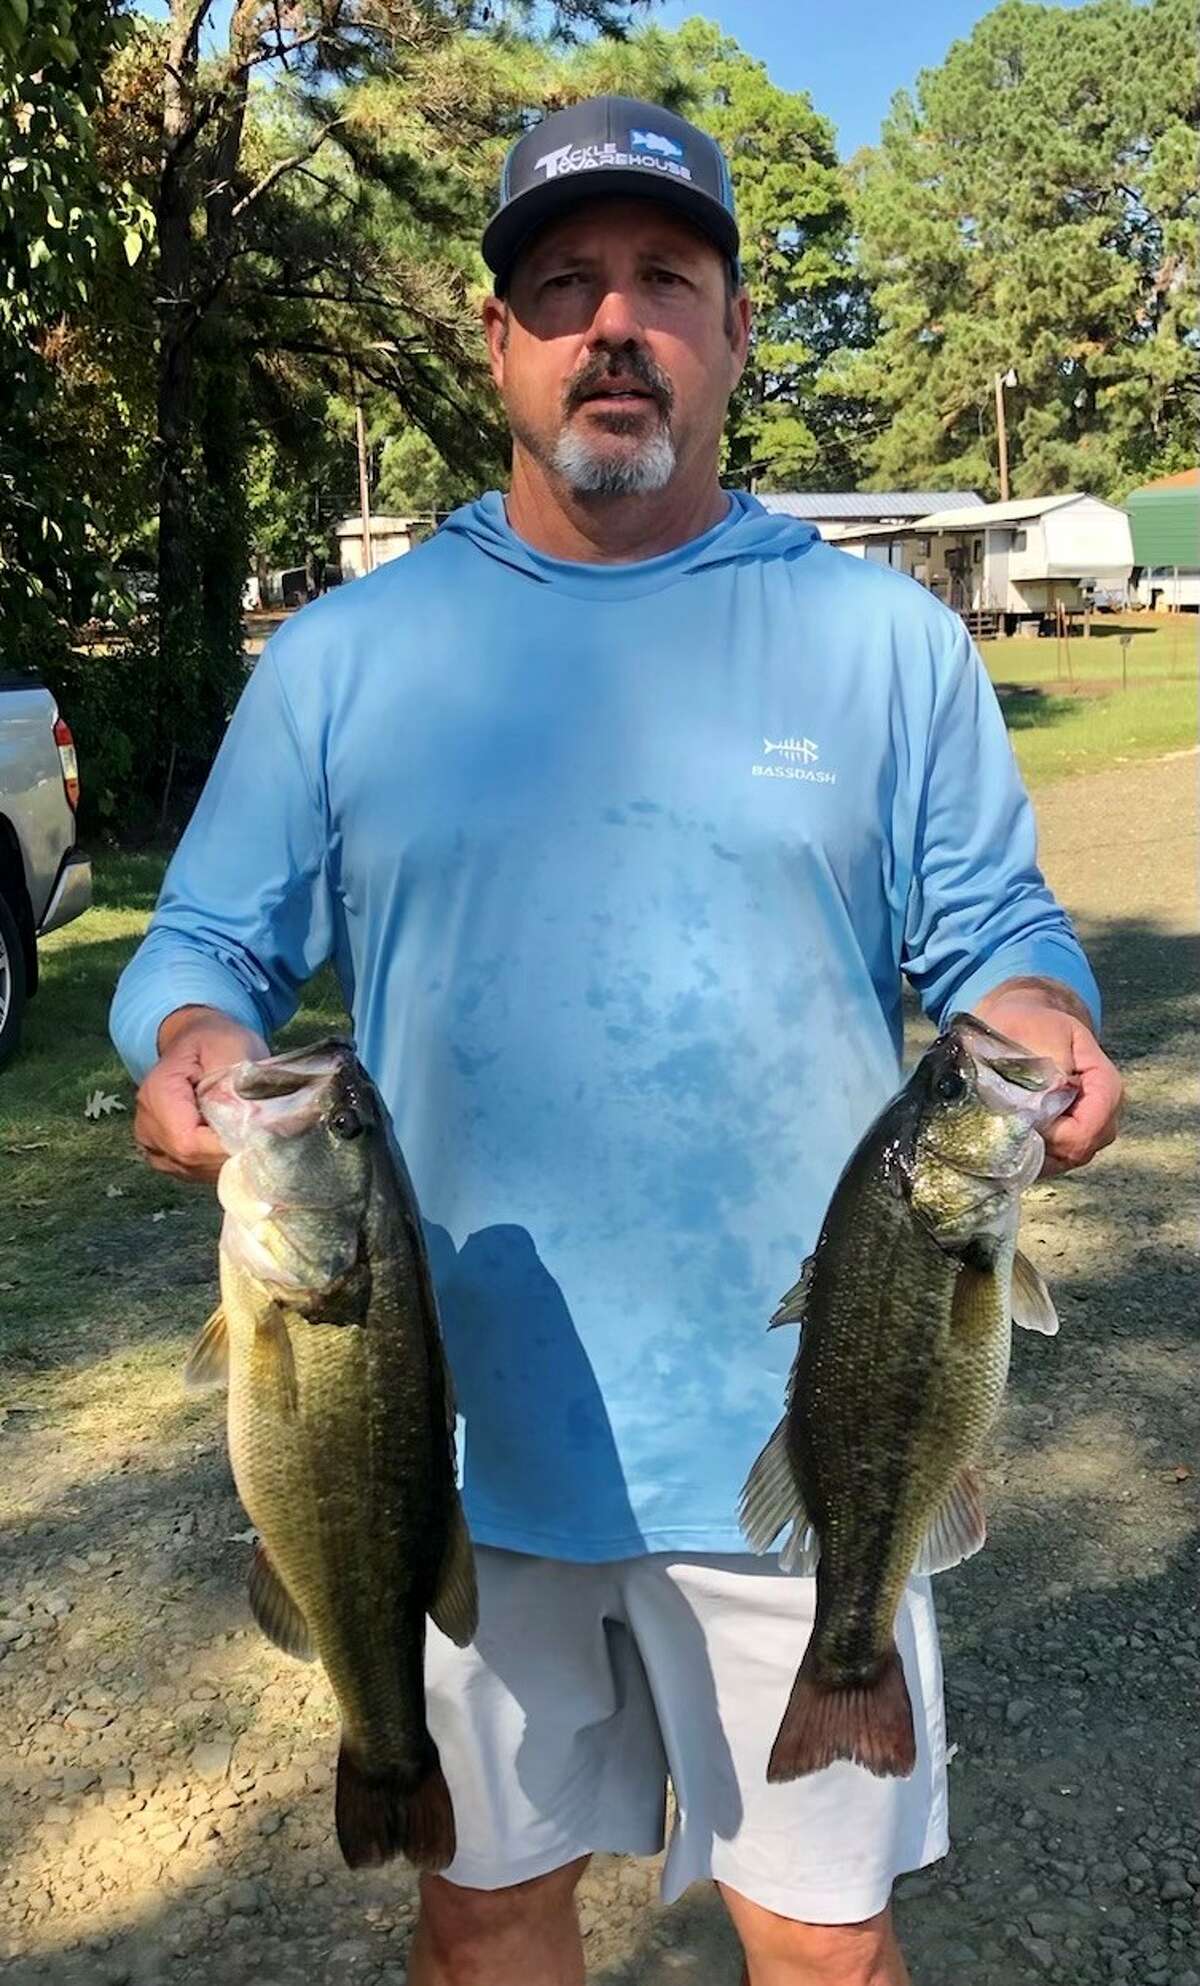 Gary West came in third at Many Bass Club's June tournament on Toledo Bend with 9.18pounds.